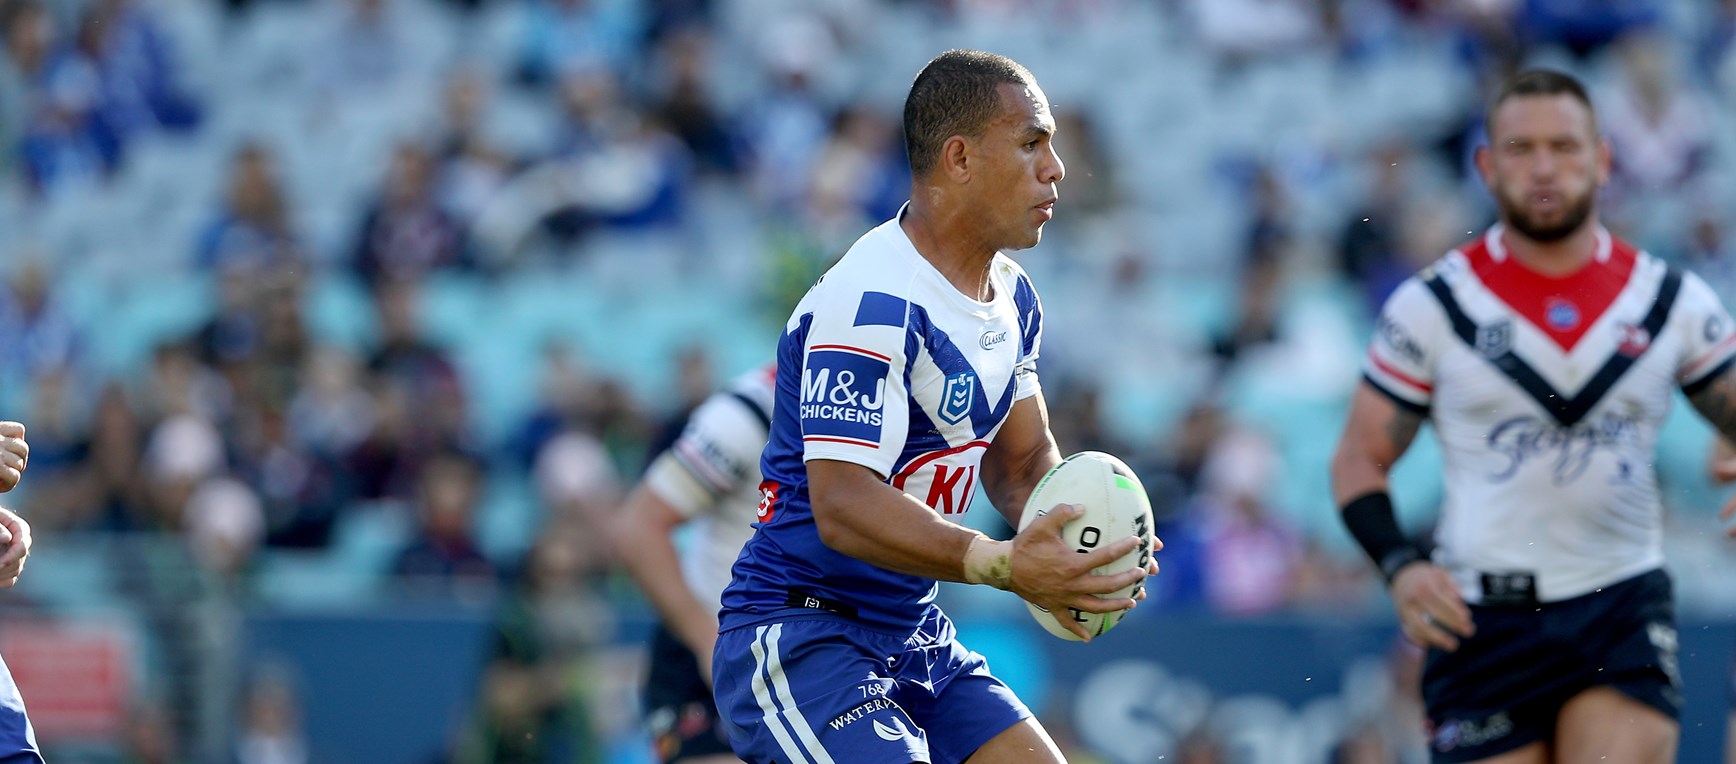 Bulldogs show fighting spirit against Roosters